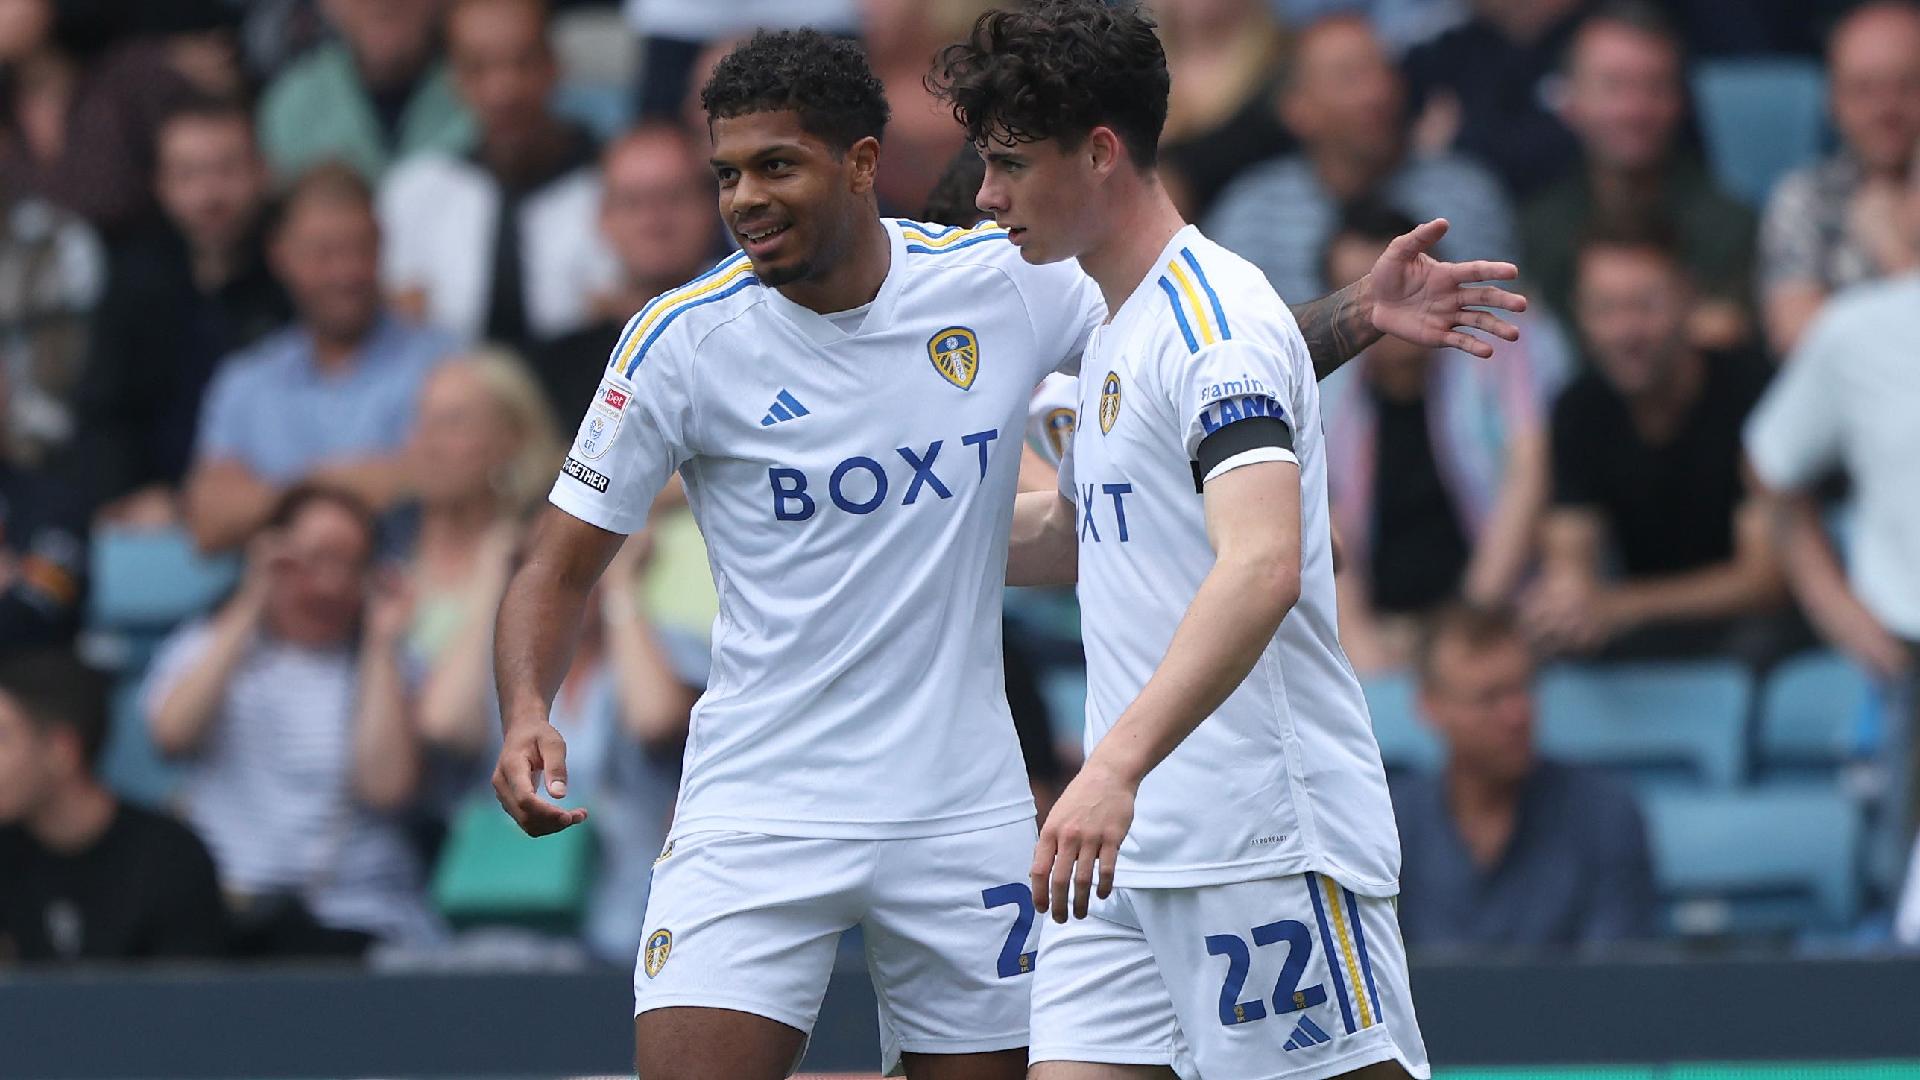 Leeds Had an Easy Victory Over Millwall in the Championship "3-0 Victory"